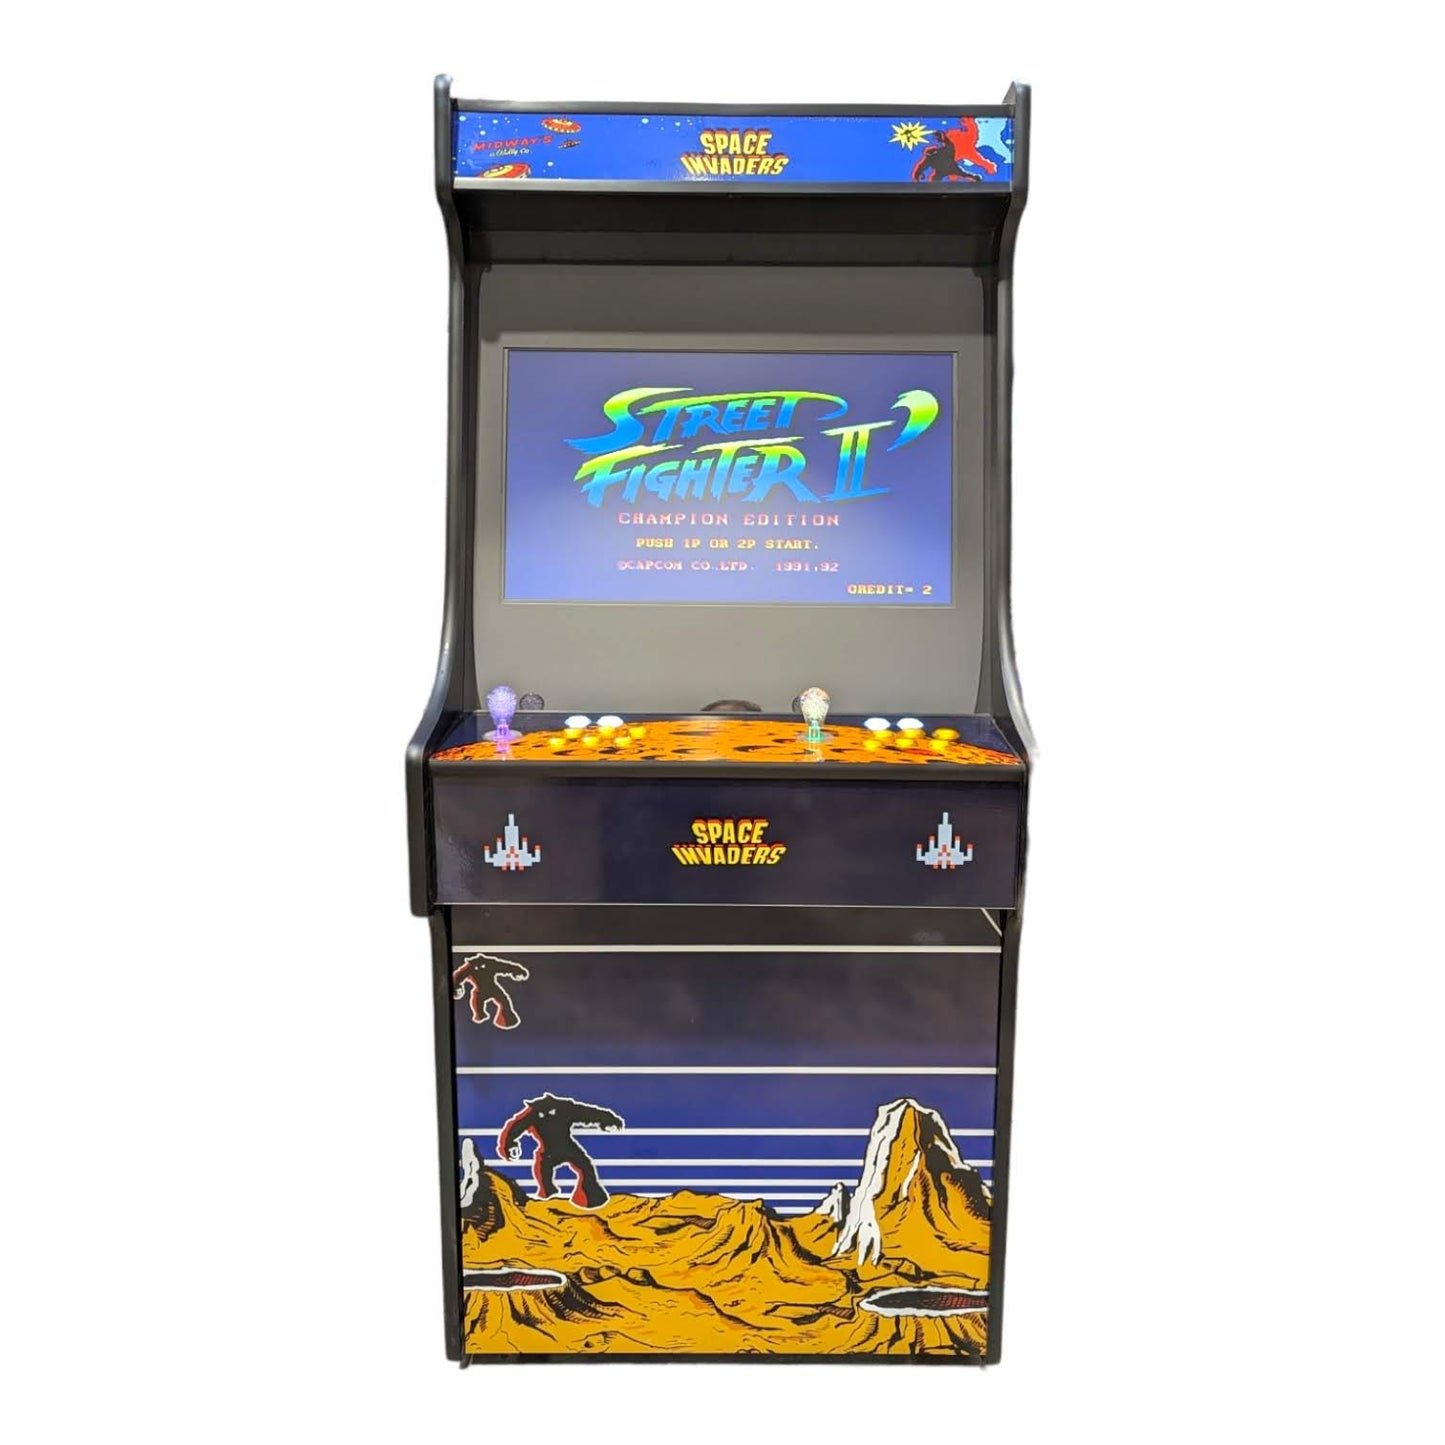 Deluxe 27 Arcade Machine - Space Invaders Theme